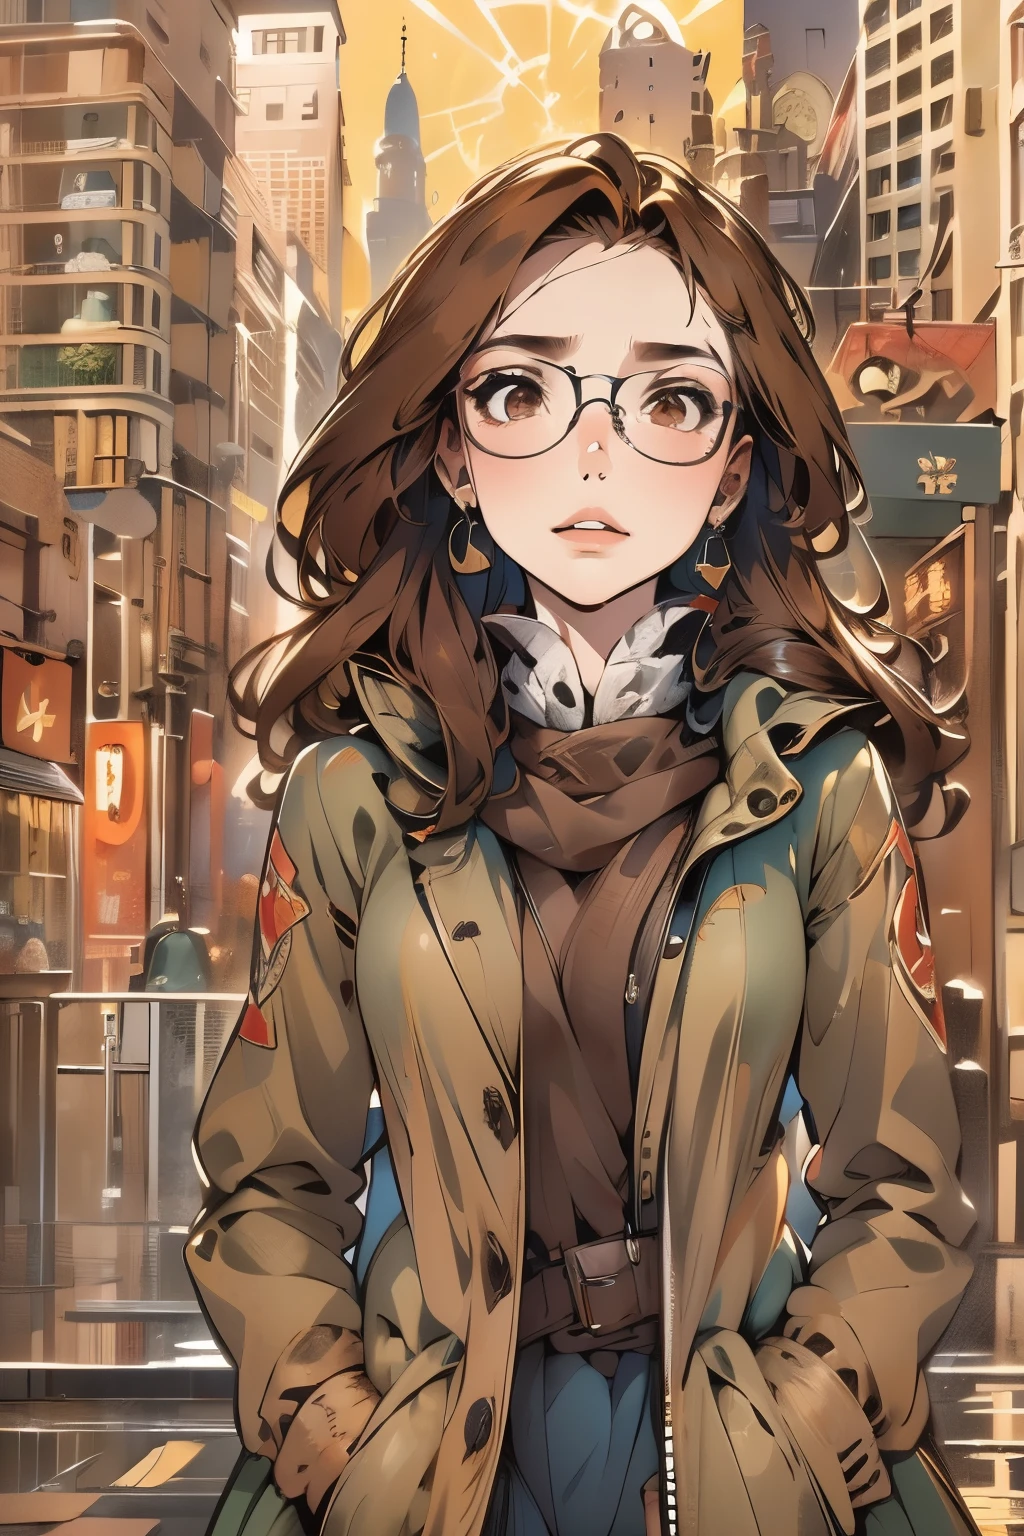 (disorganized, High resolution, Super detailed, realistic, ), 1 girl,mature, alone, long brown hair suit,brown eyes,  (Glasseodern city background, Super detailedな, highest quality, Detail view, vectorized, 8K,  graphic design, vector lines, Full HD，whole body